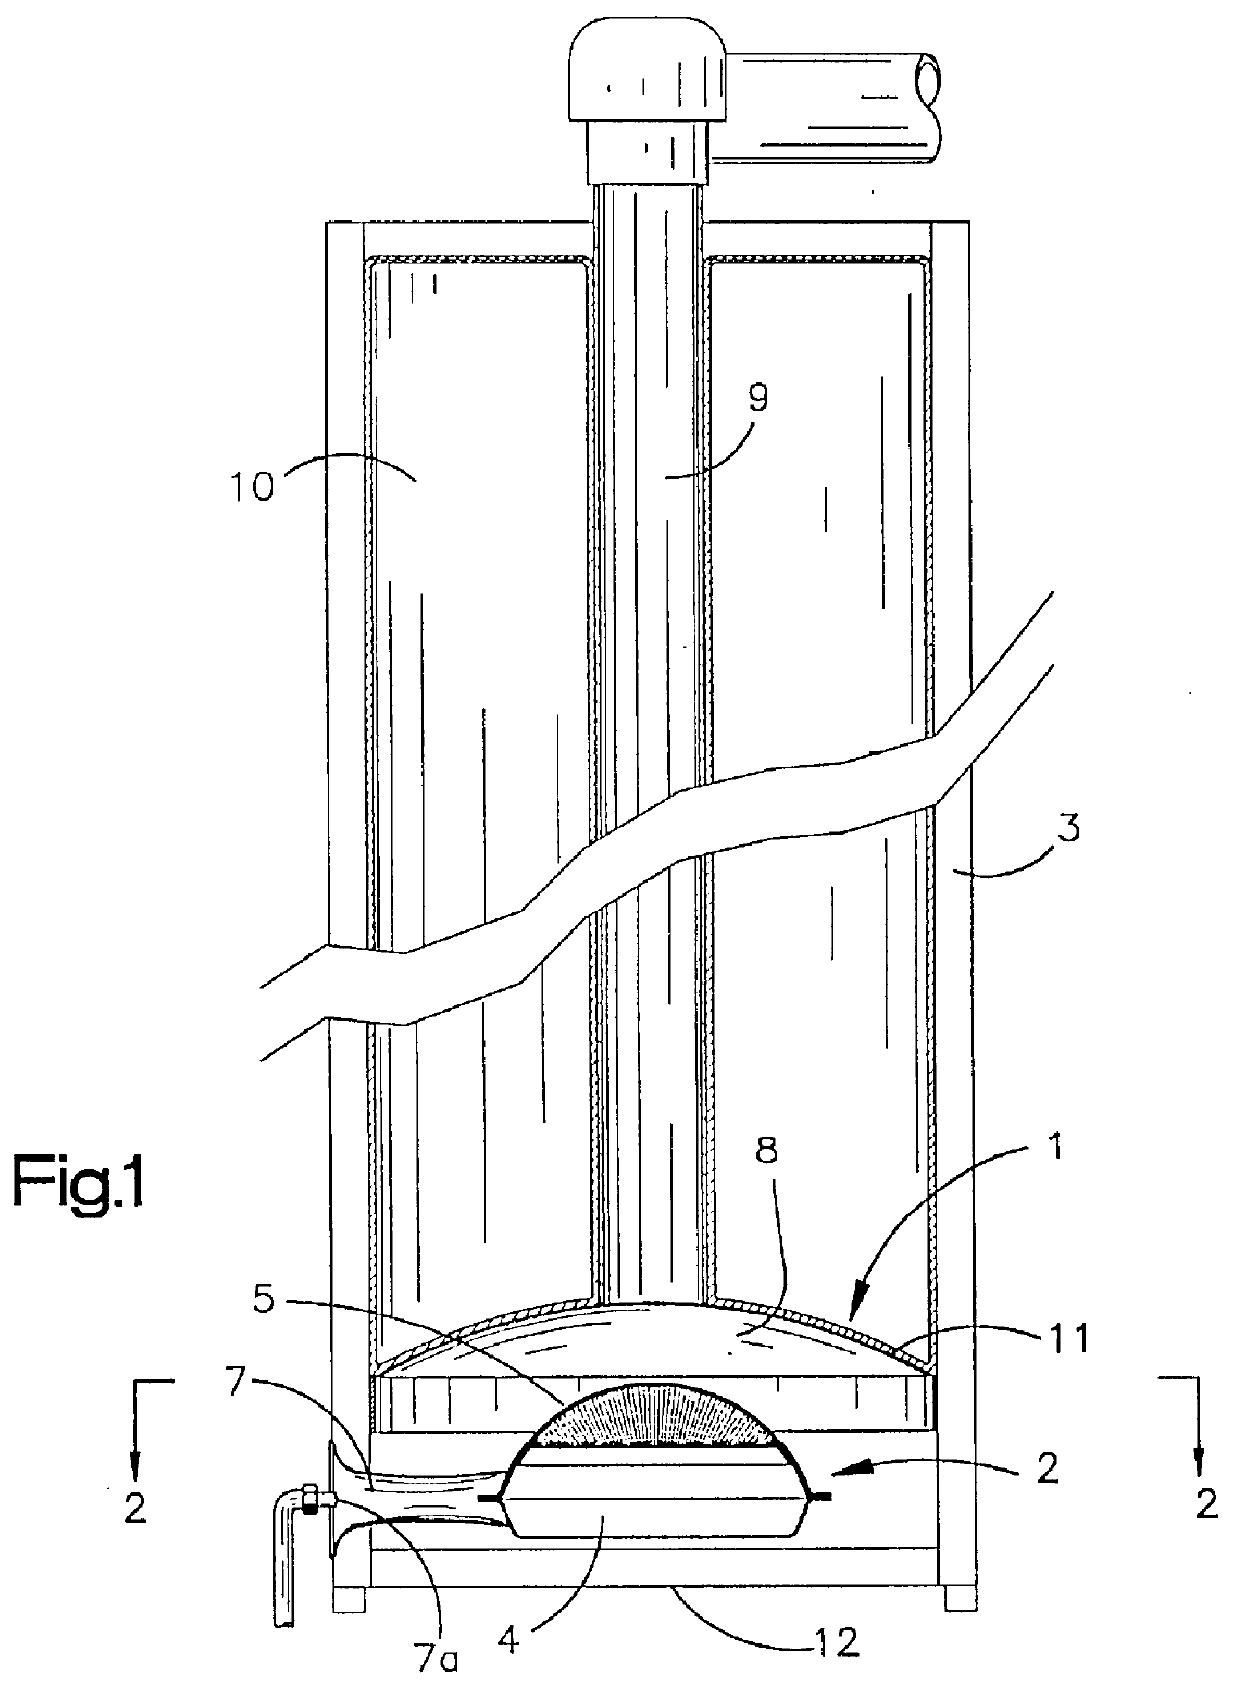 Gas-fired heaters with burners which operate without secondary air and have a substantially sealed combustion chamber